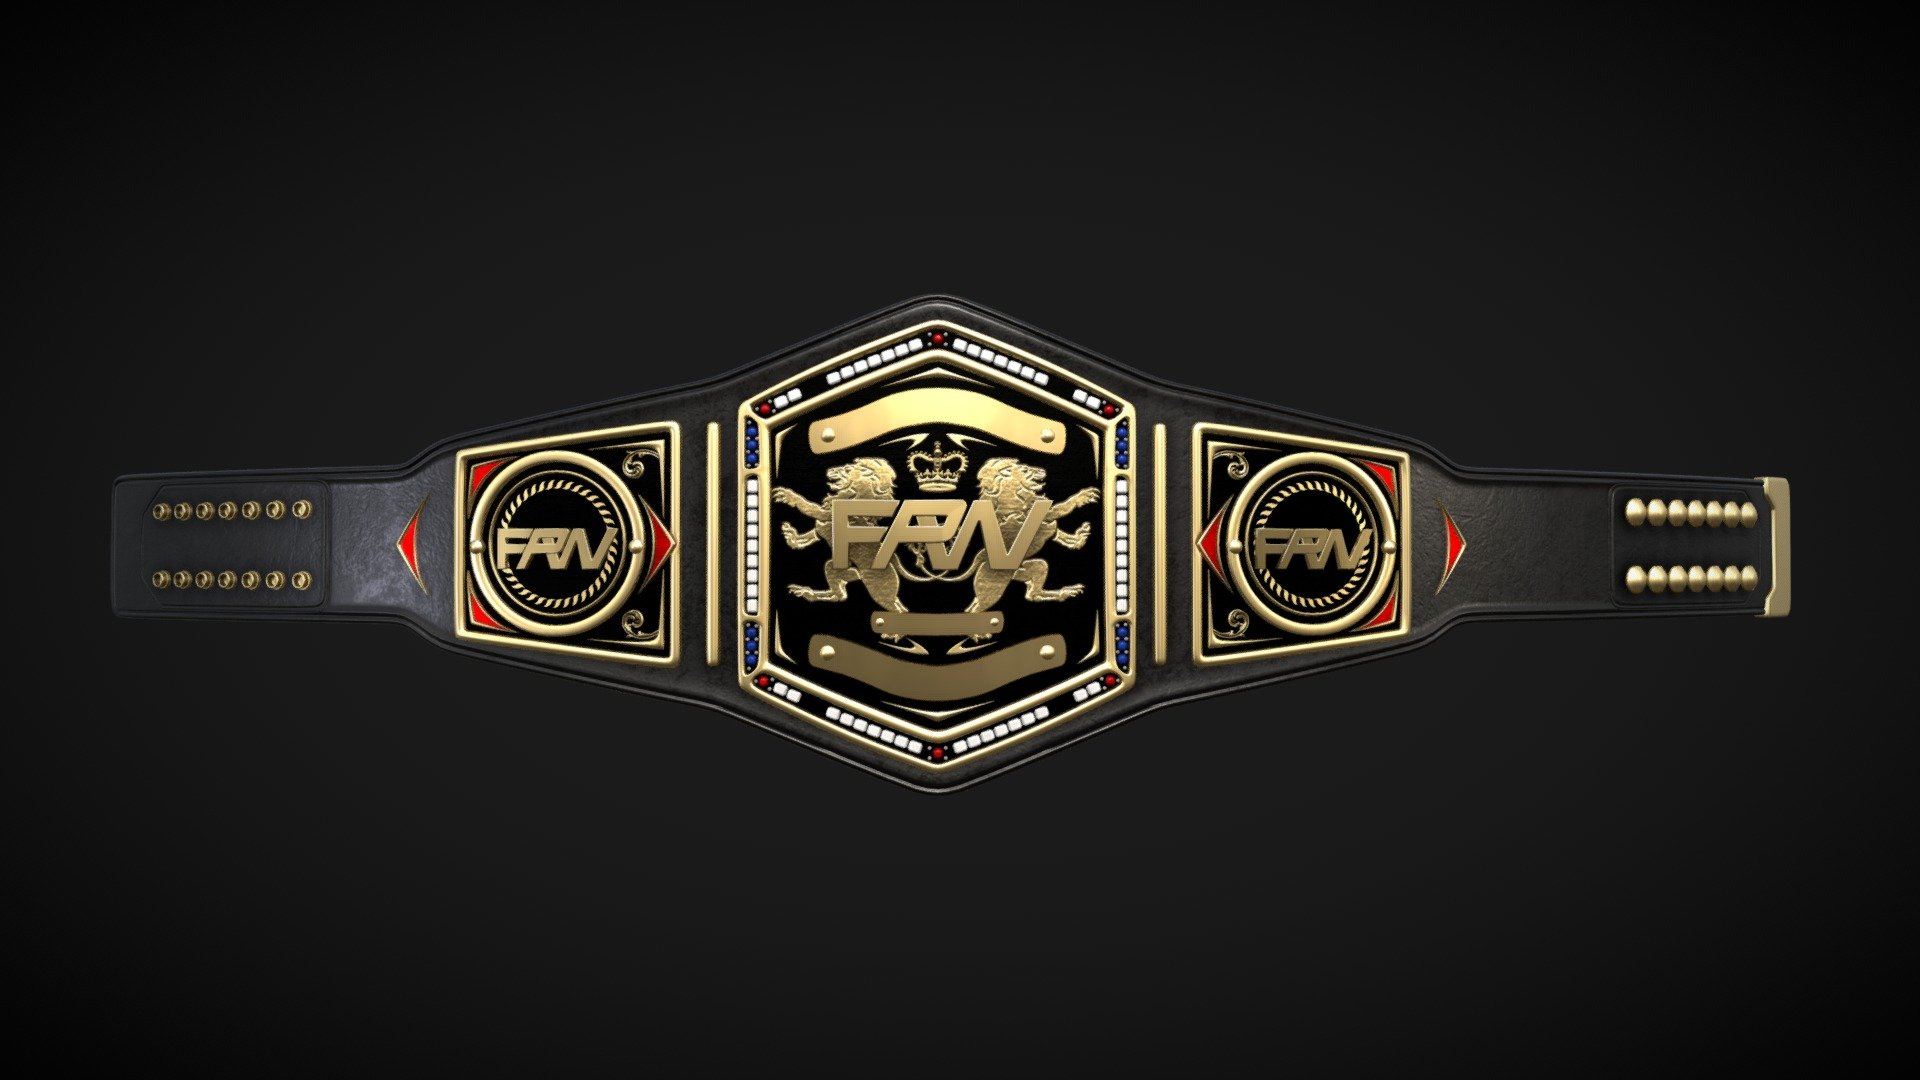 Wrestling champion belt concept. Black and gold with gems.

Made by using Blender and Substance Painter 3d model